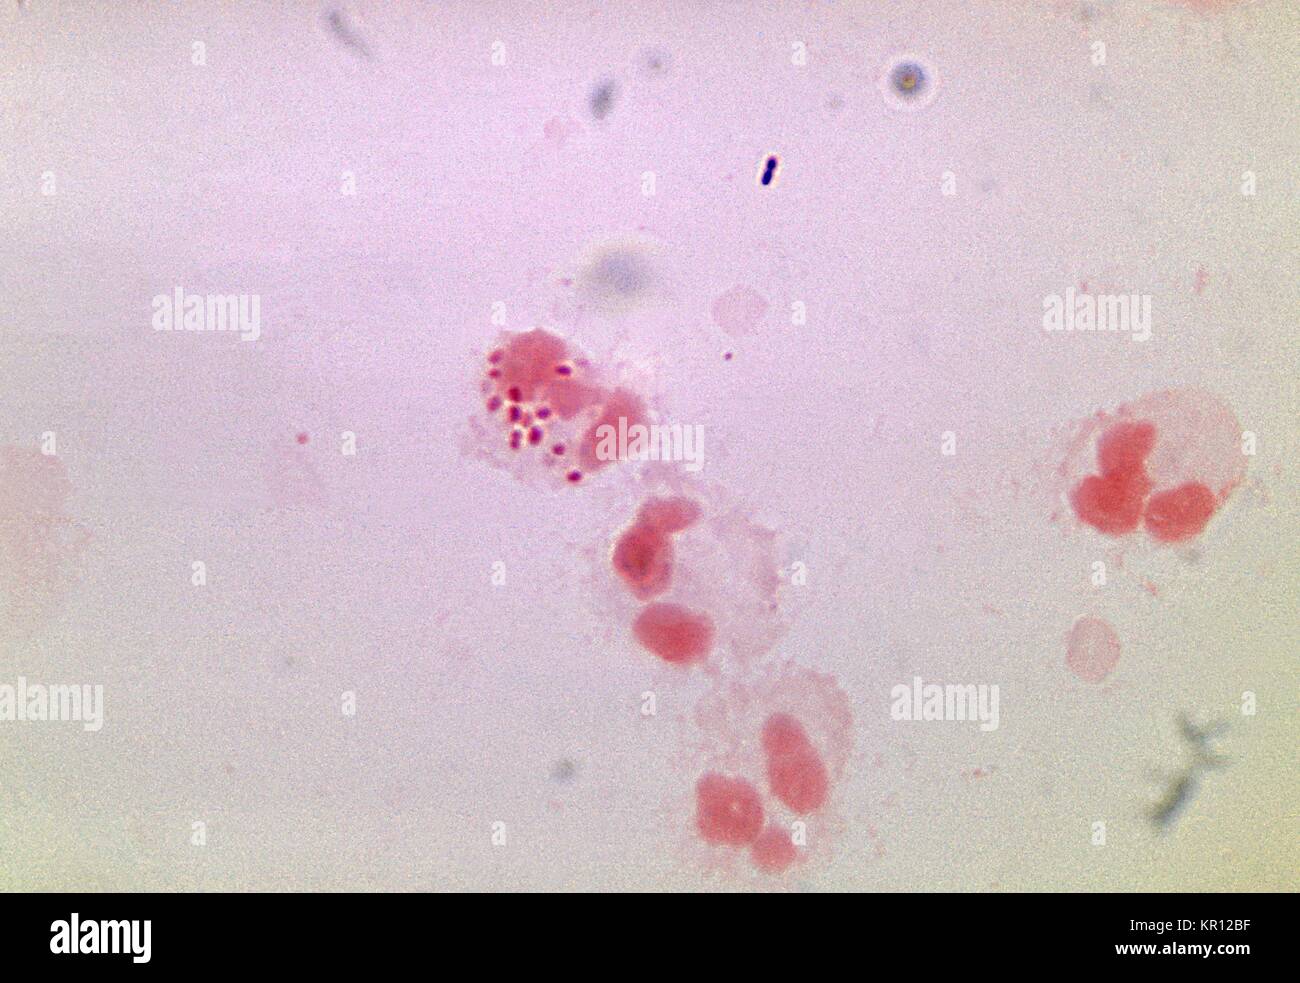 This photomicrograph depicts Neisseria gonorrhoeae bacteria within a neutrophil, 1972. N. gonorrhoeae, a gram-negative diplococcus, is the causative agent for Gonorrhea. Though these bacteria can infect the genital tract, mouth, and rectum they can become disseminated systemically throughout a person?s bloodstream. Image courtesy CDC/Dr. James Volk. Stock Photo